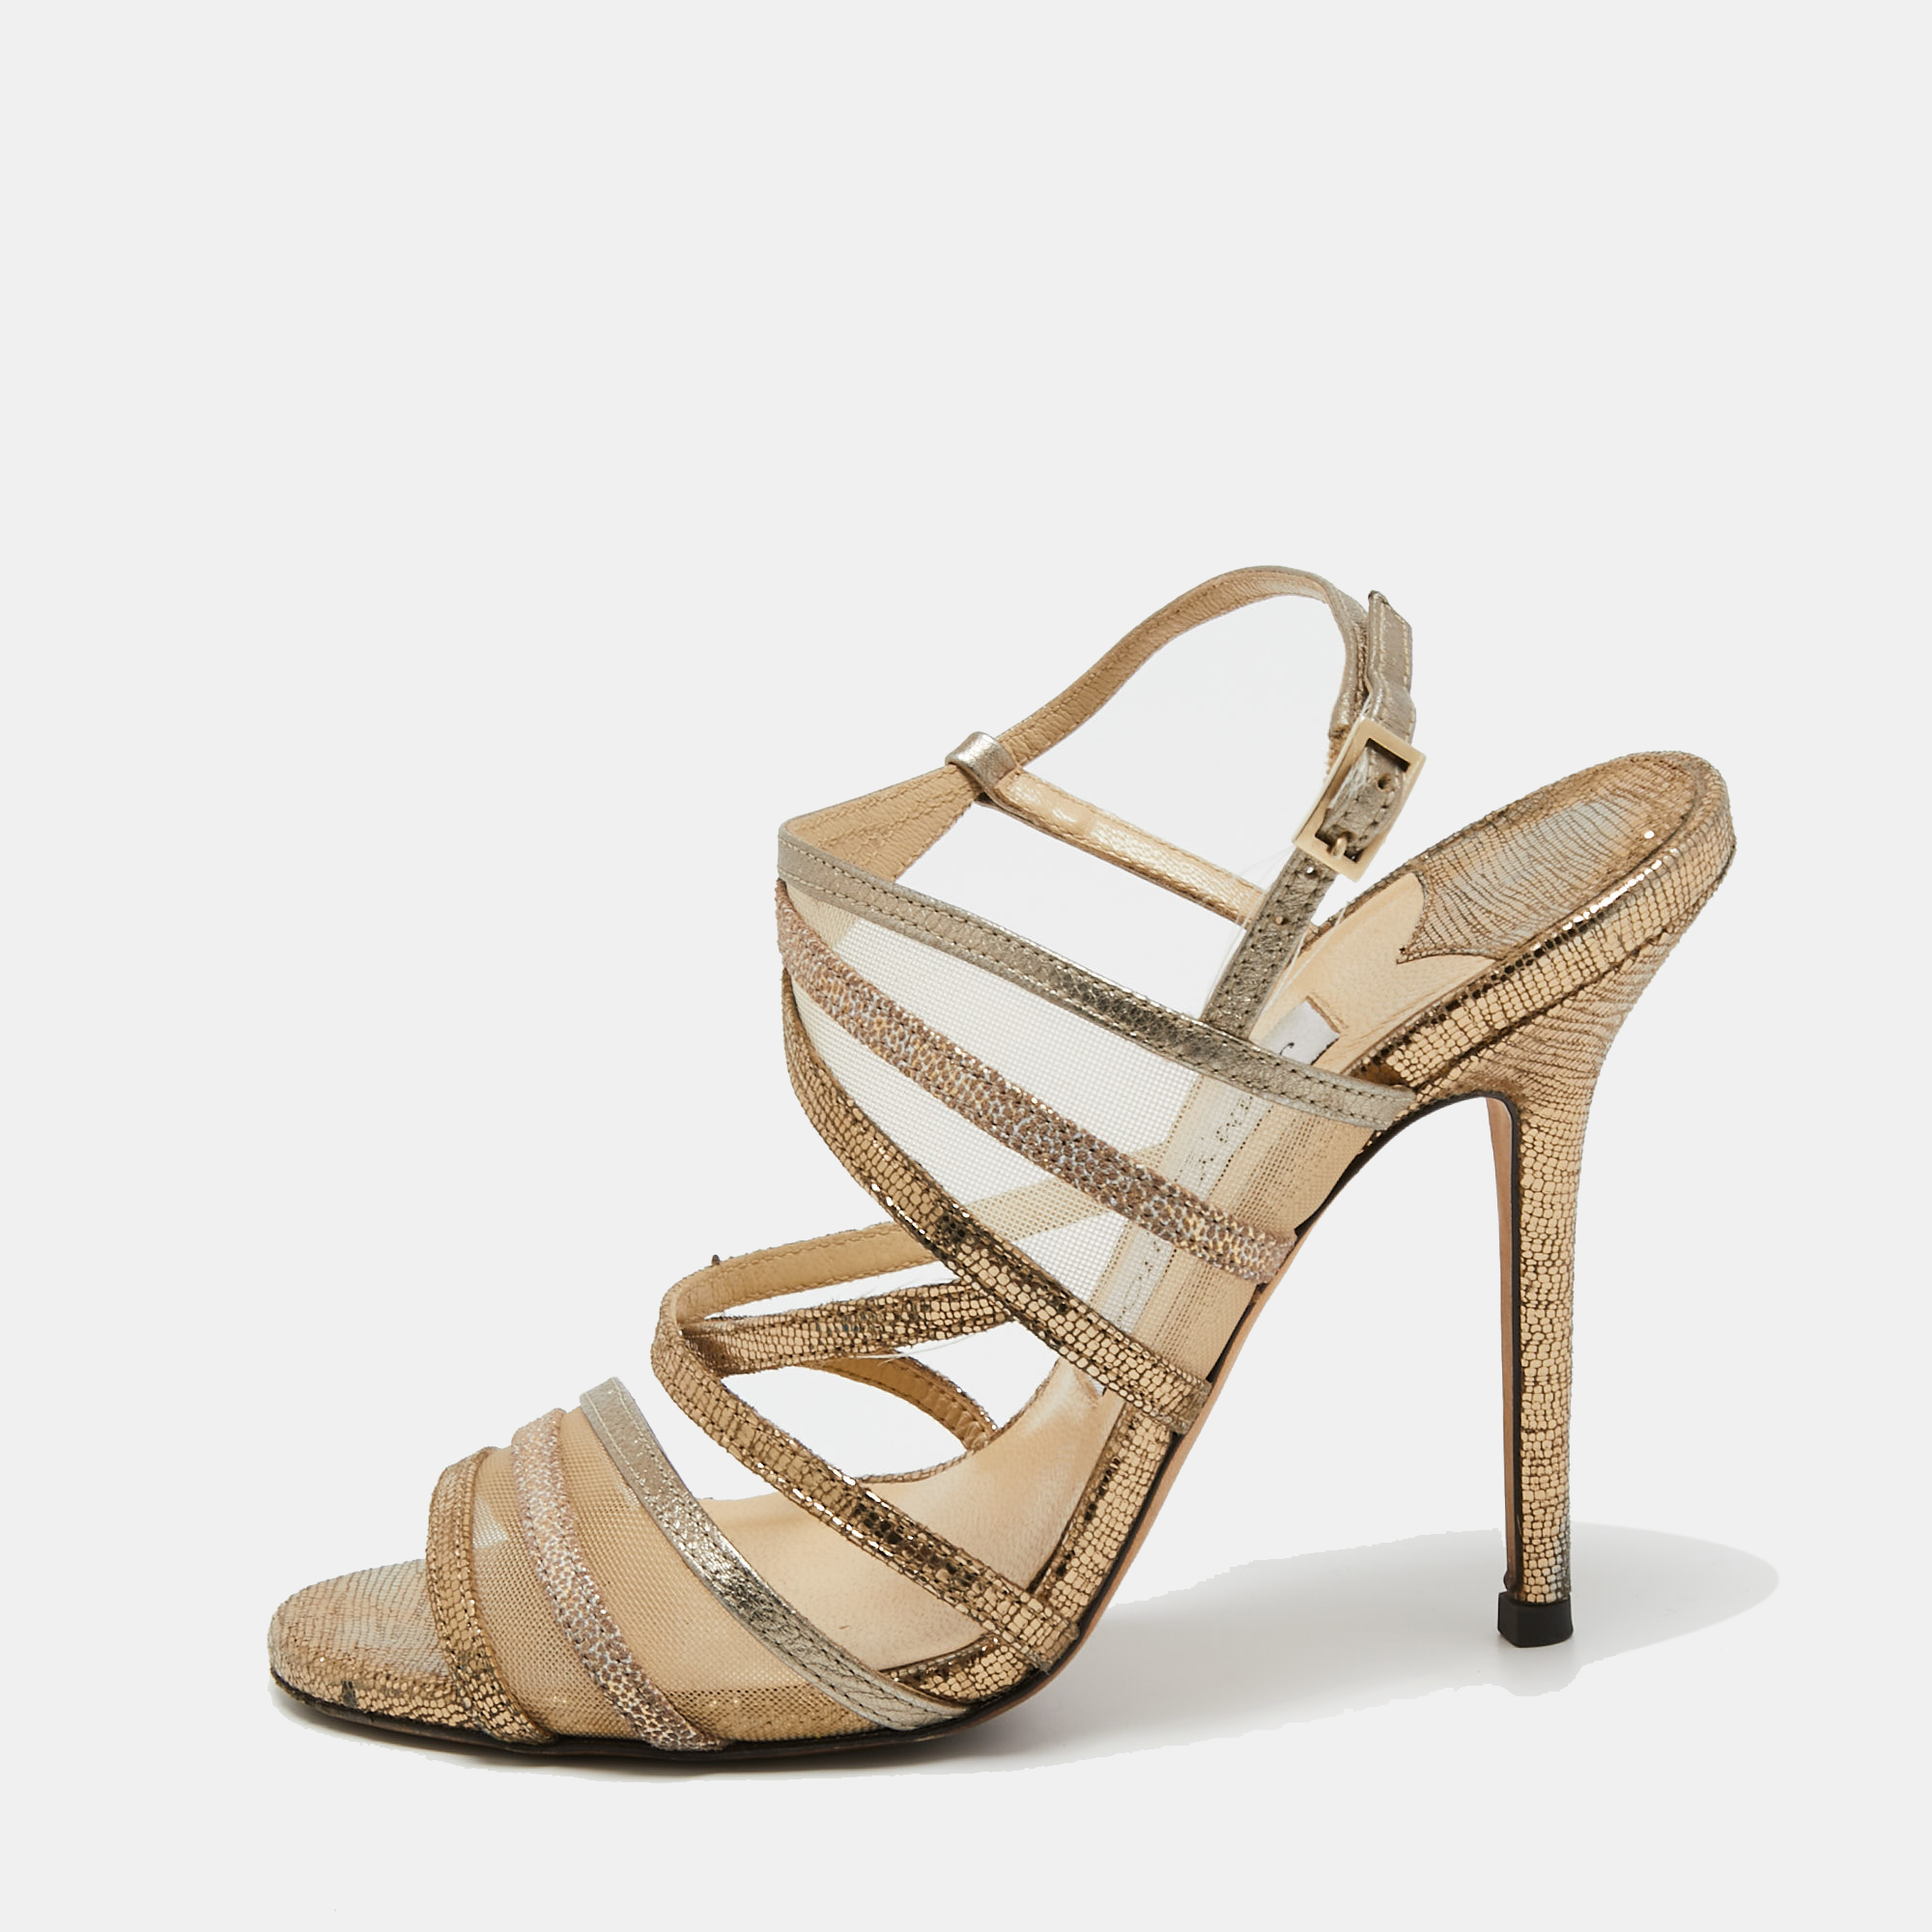 Jimmy choo metallic gold mesh and leather ankle strap sandals size 36